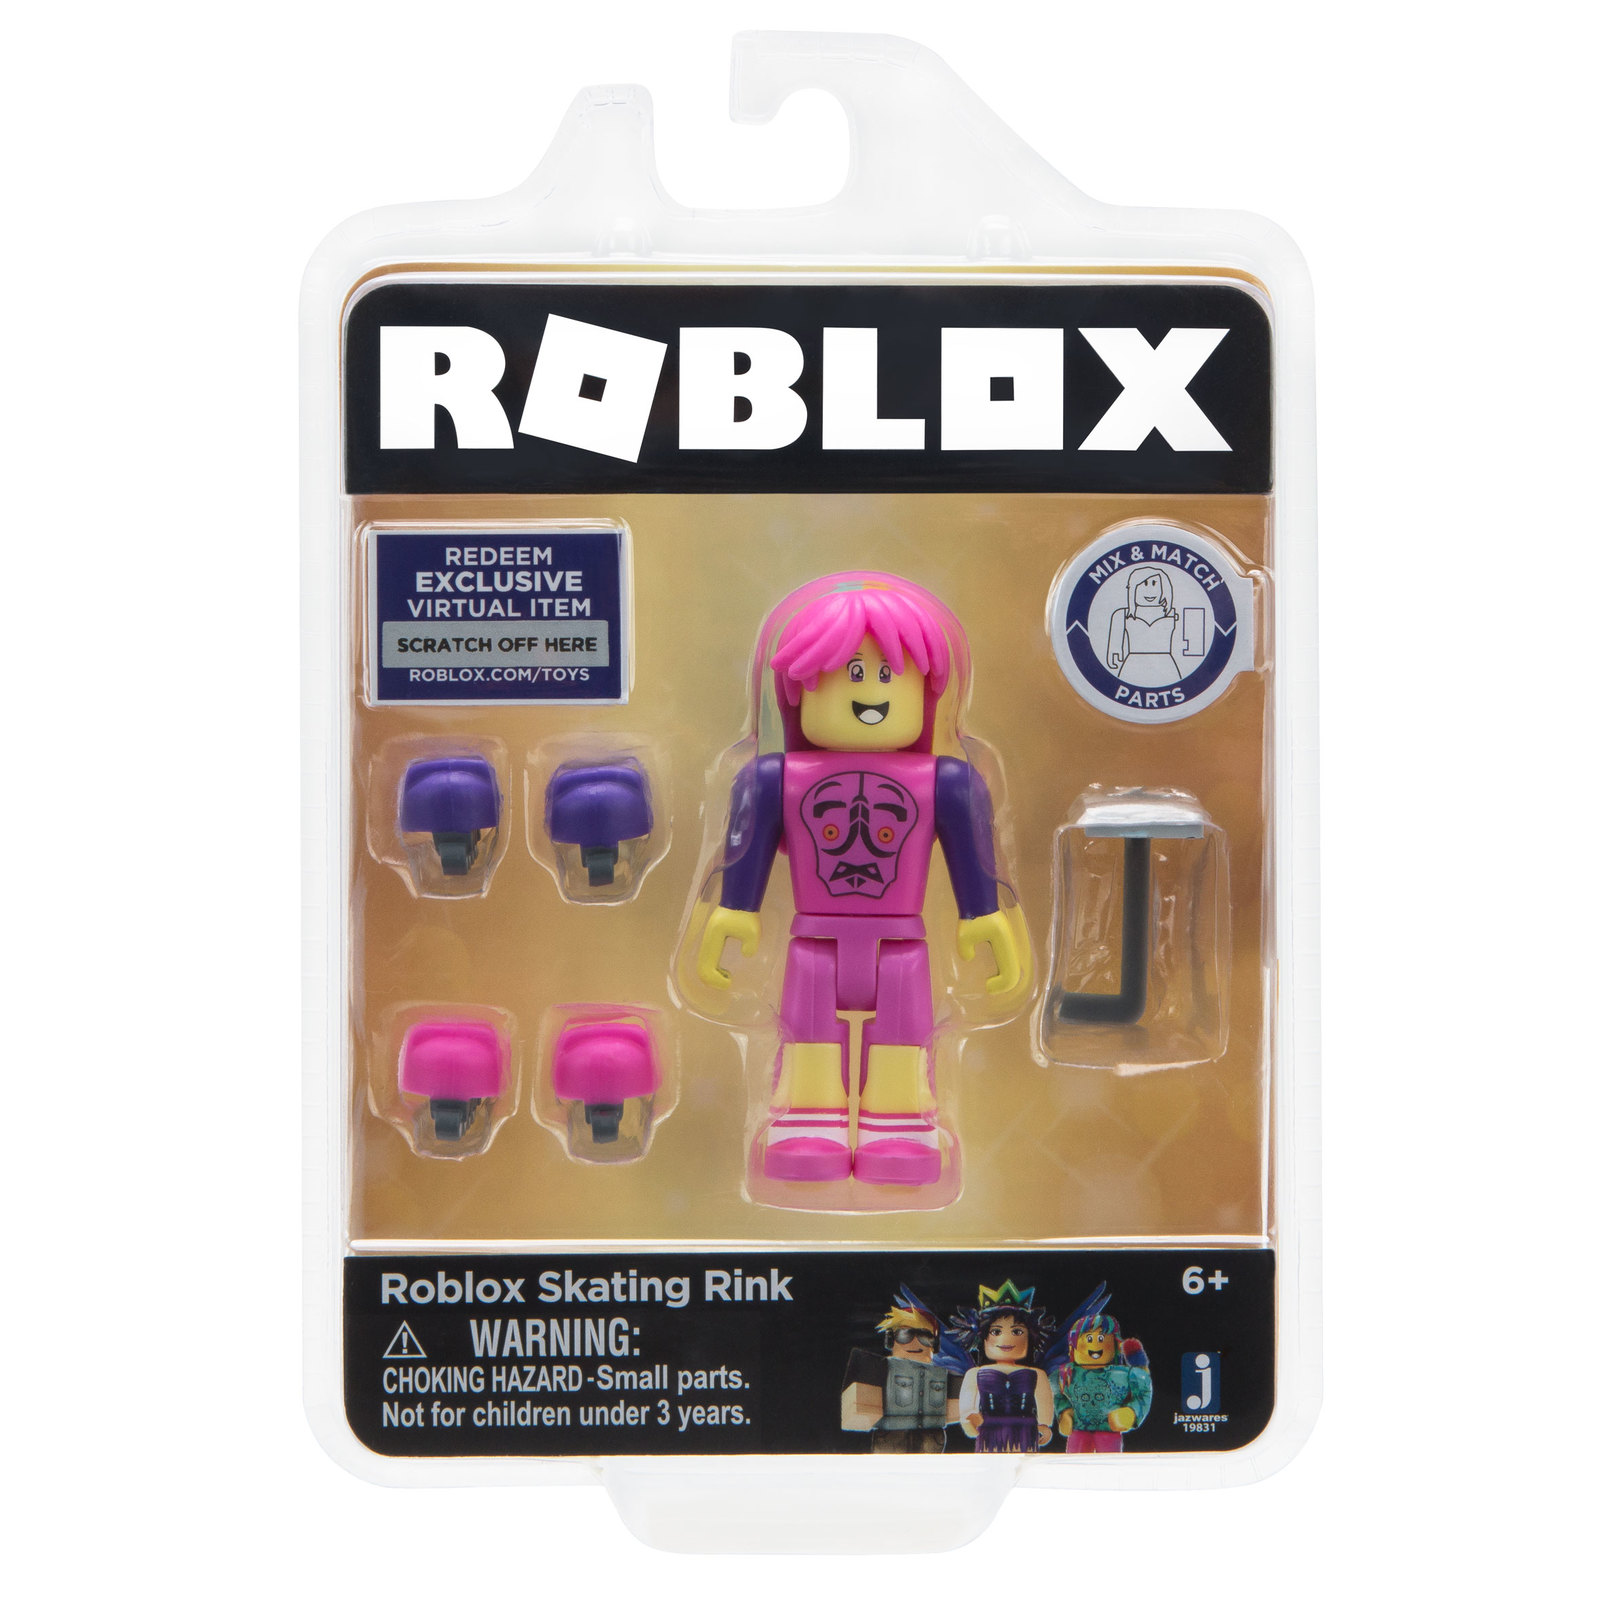 New Roblox Celebrity Core Figure Pack Roblox Skating Rink - roblox tv movie video game action figure playsets ebay